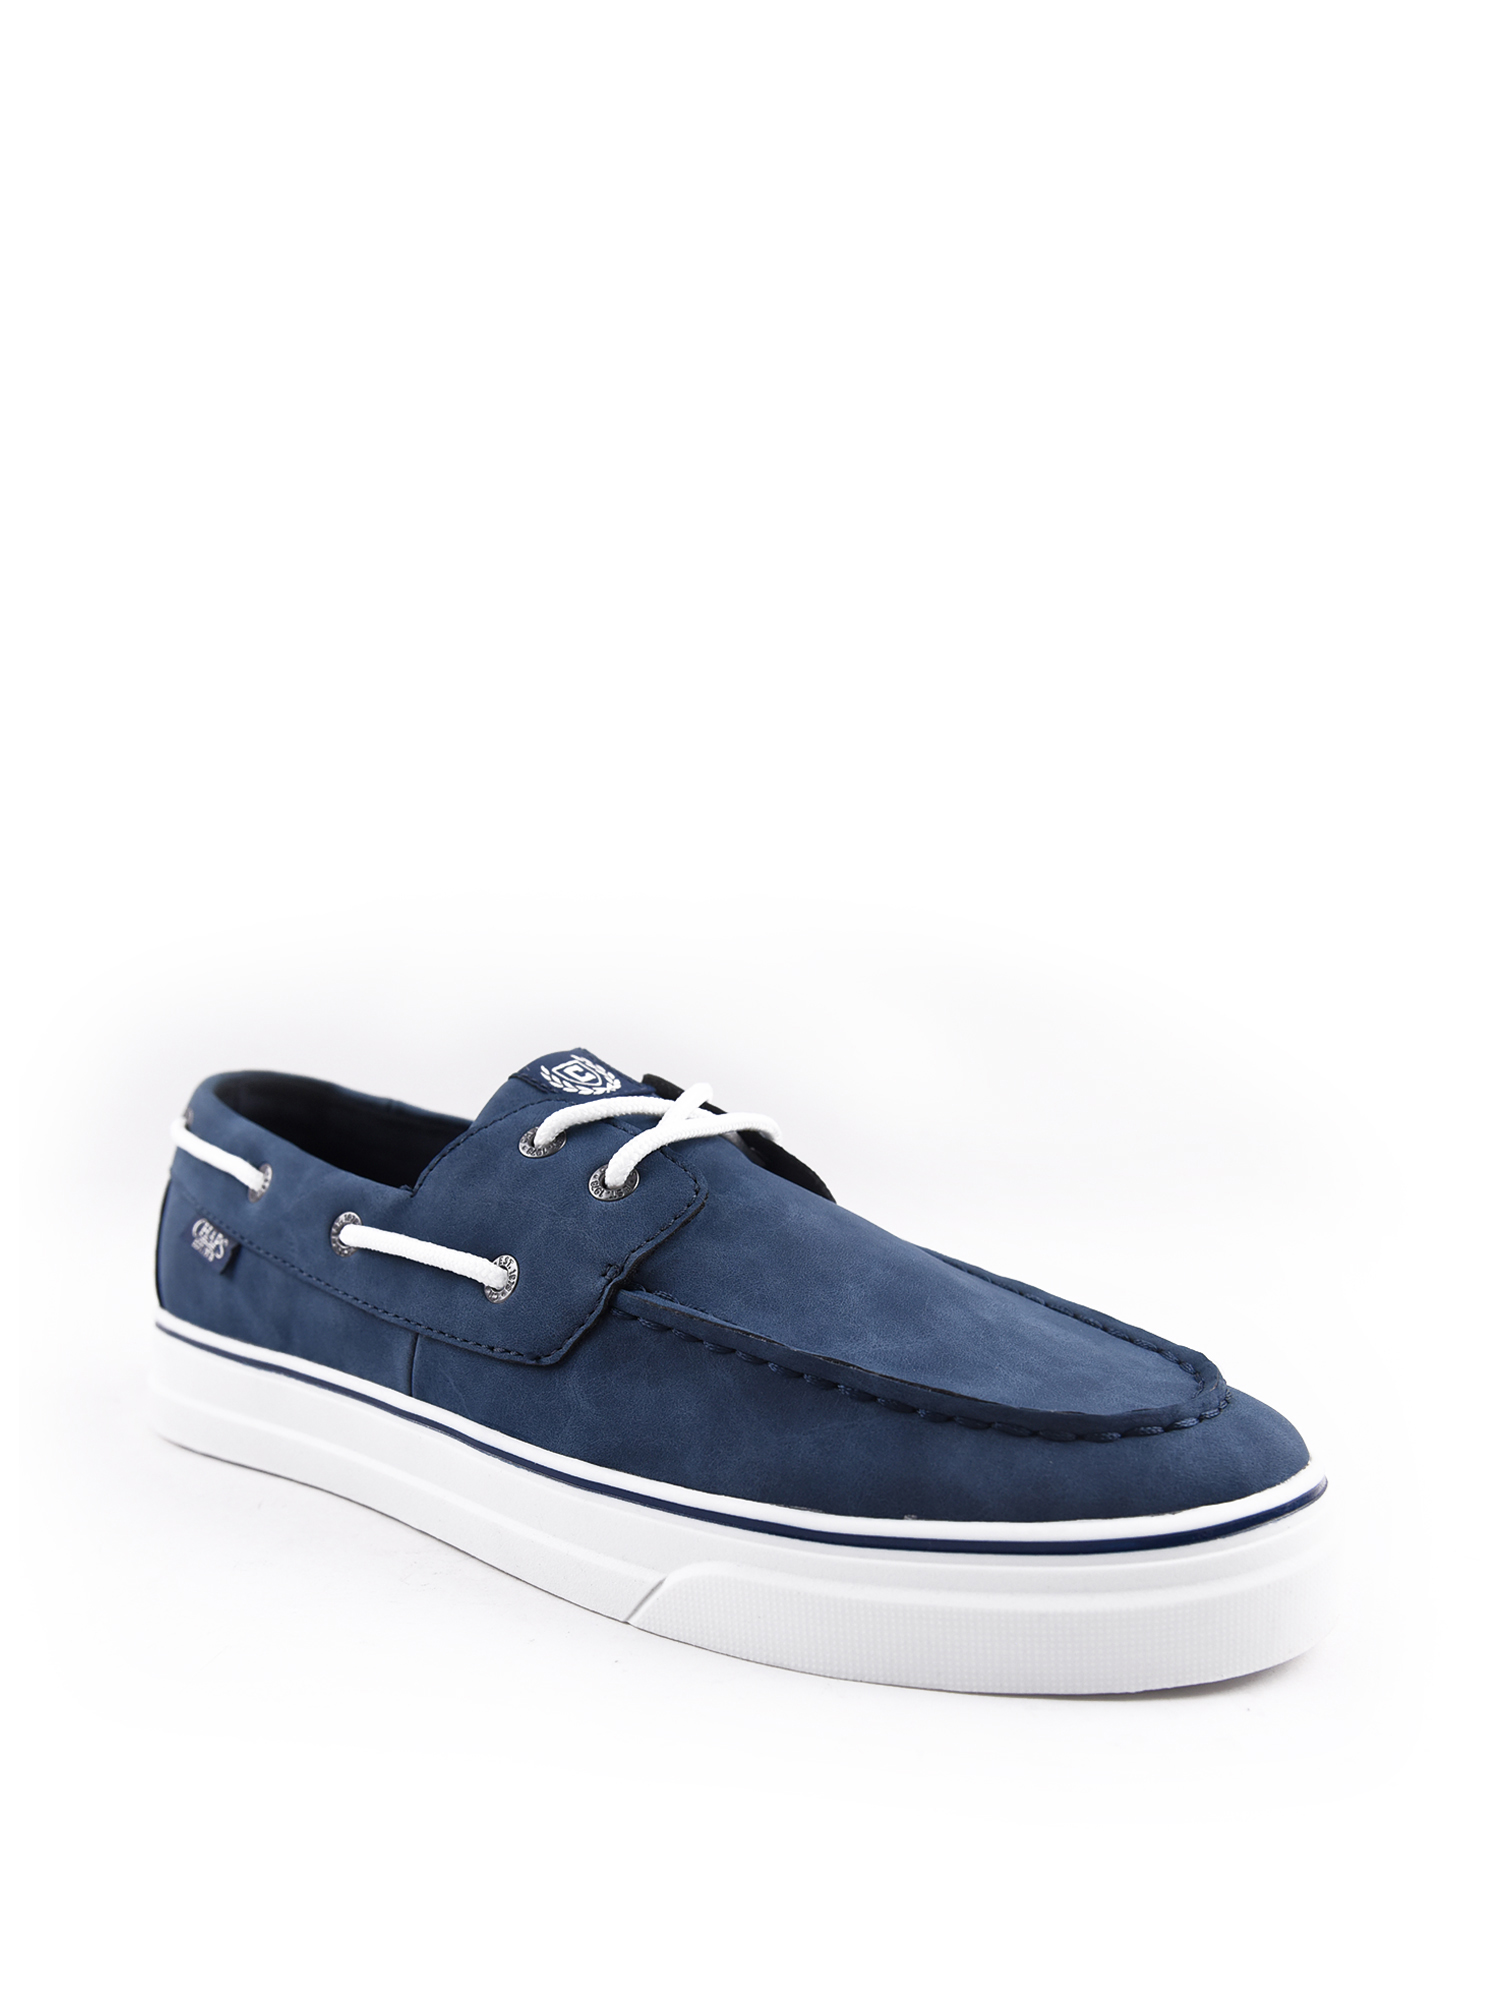 Chaps Mens Casual Dock Boat Shoe - image 1 of 7